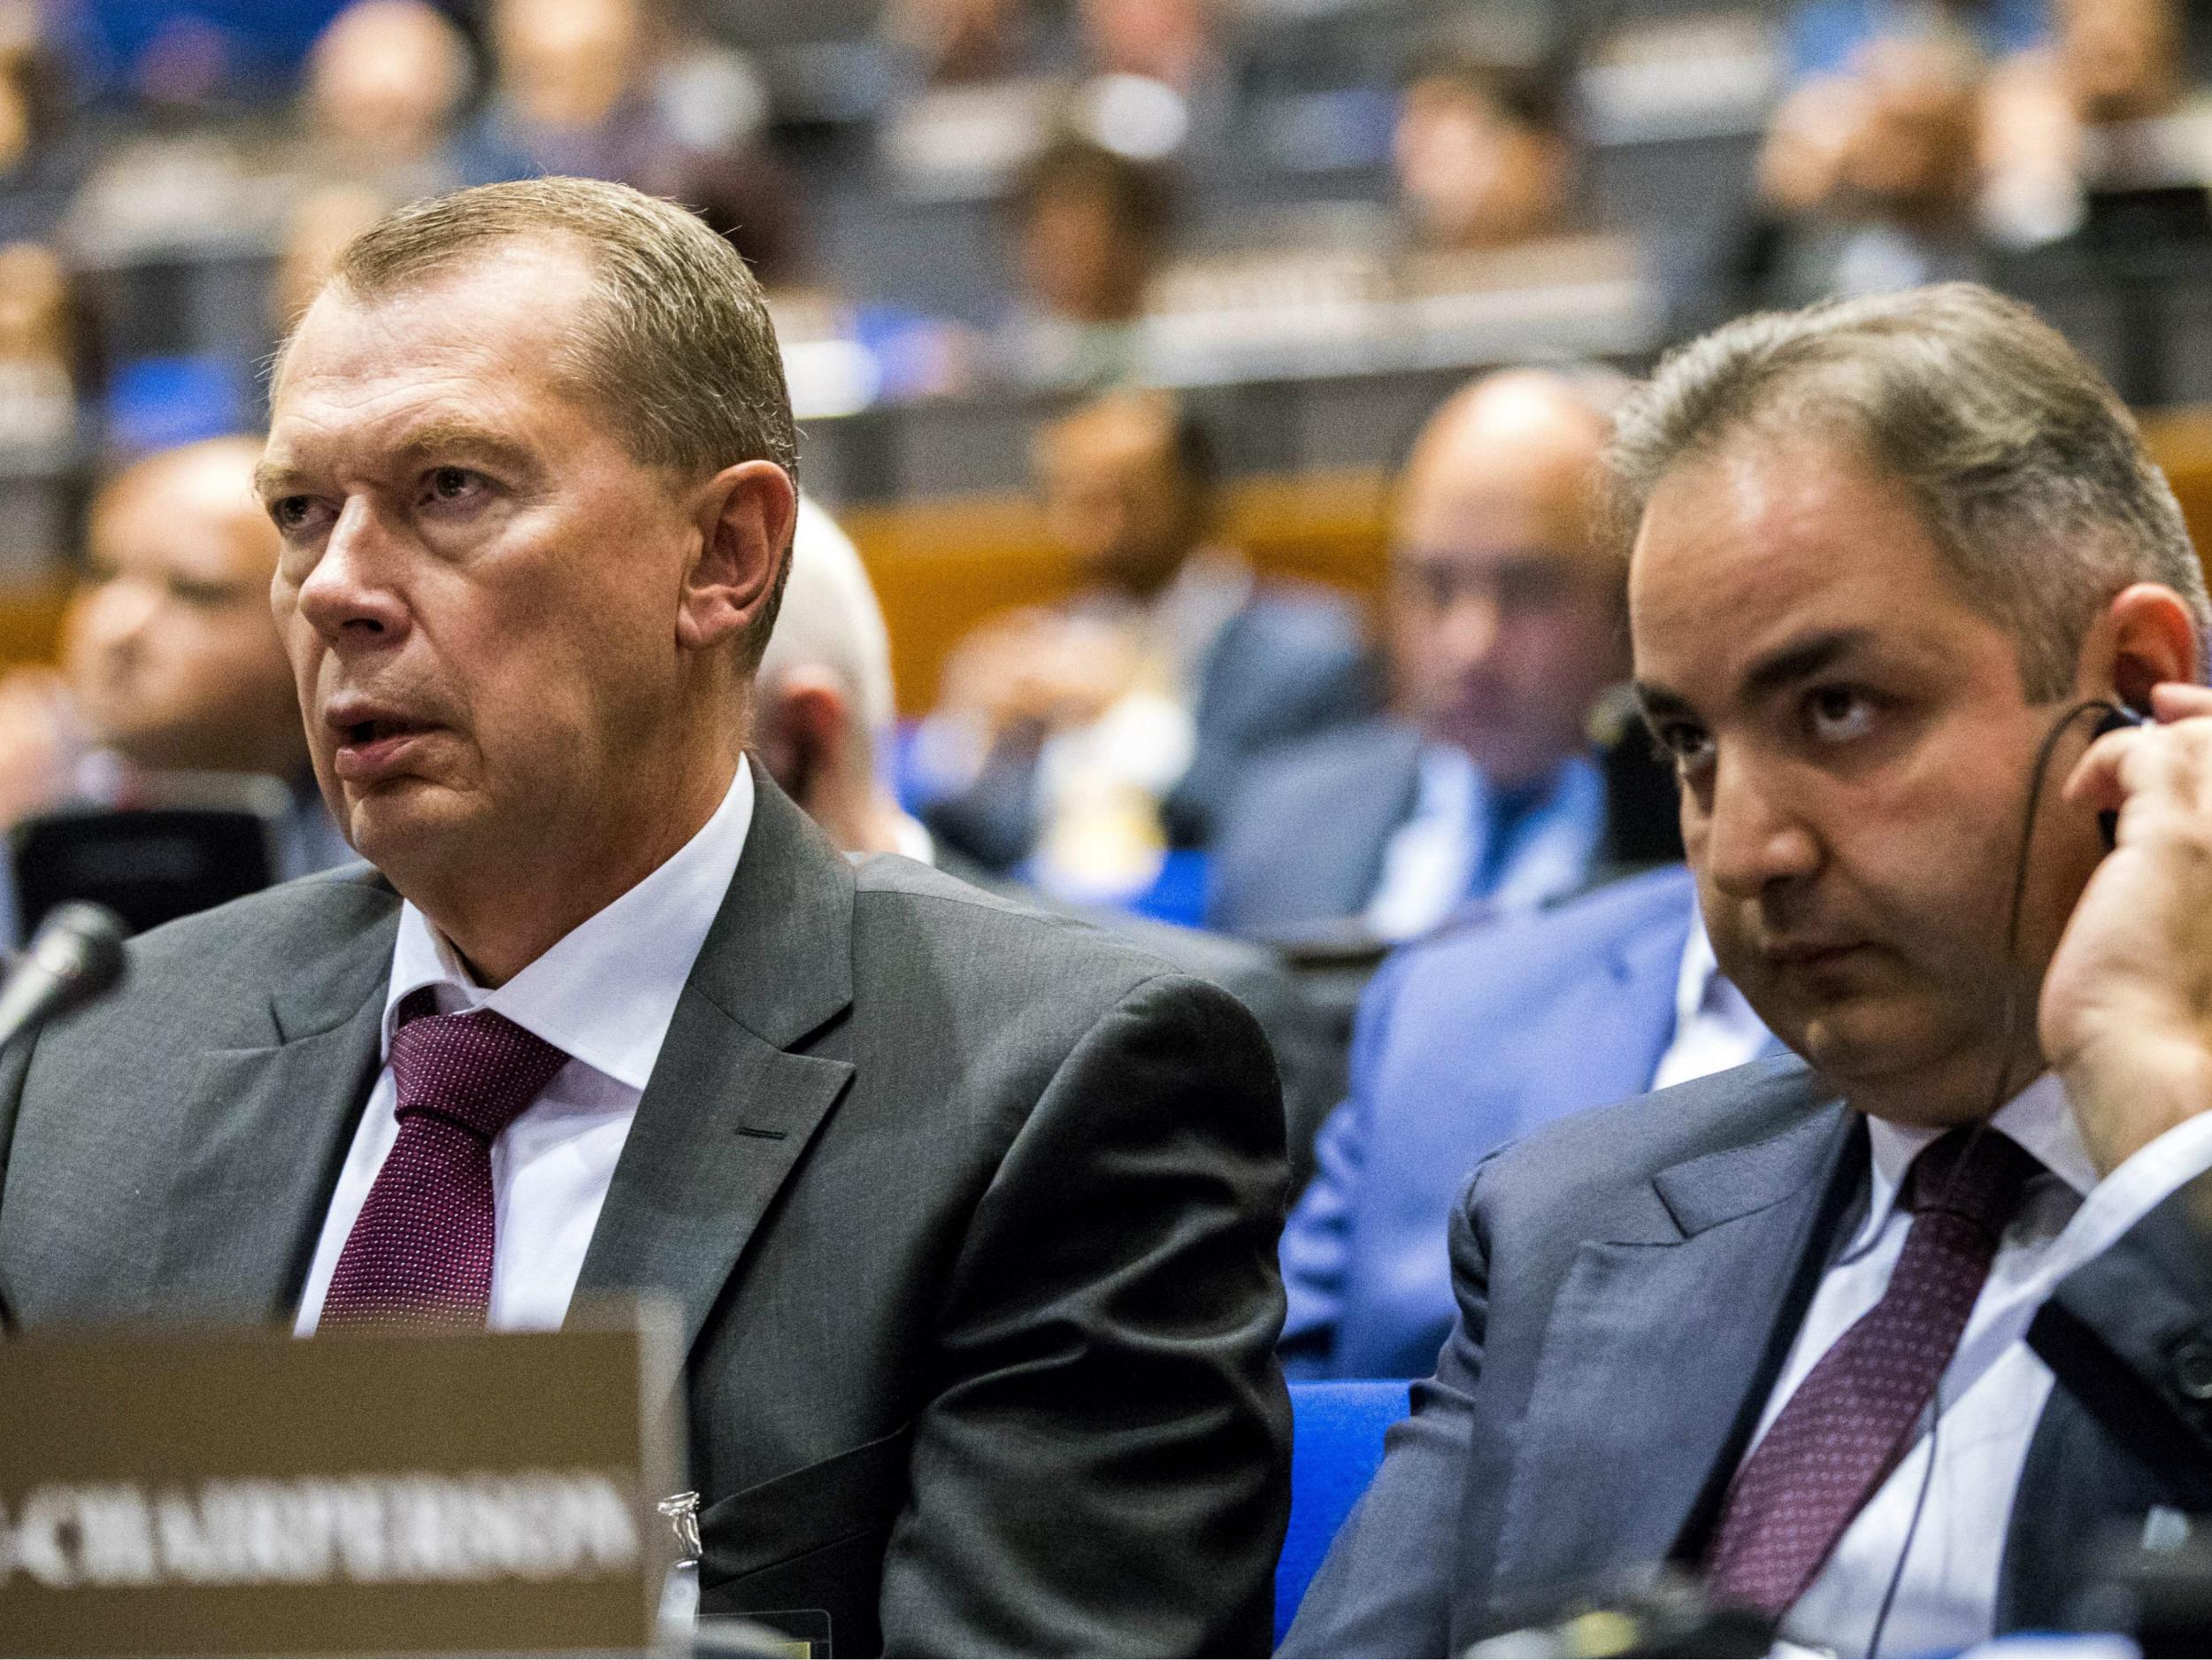 The Russian ambassador Alexander Sjoelgin attends a special session of member-states of the Organization for the Prohibition of Chemical Weapons (OPCW) in The Hague, on 26 June 2018.